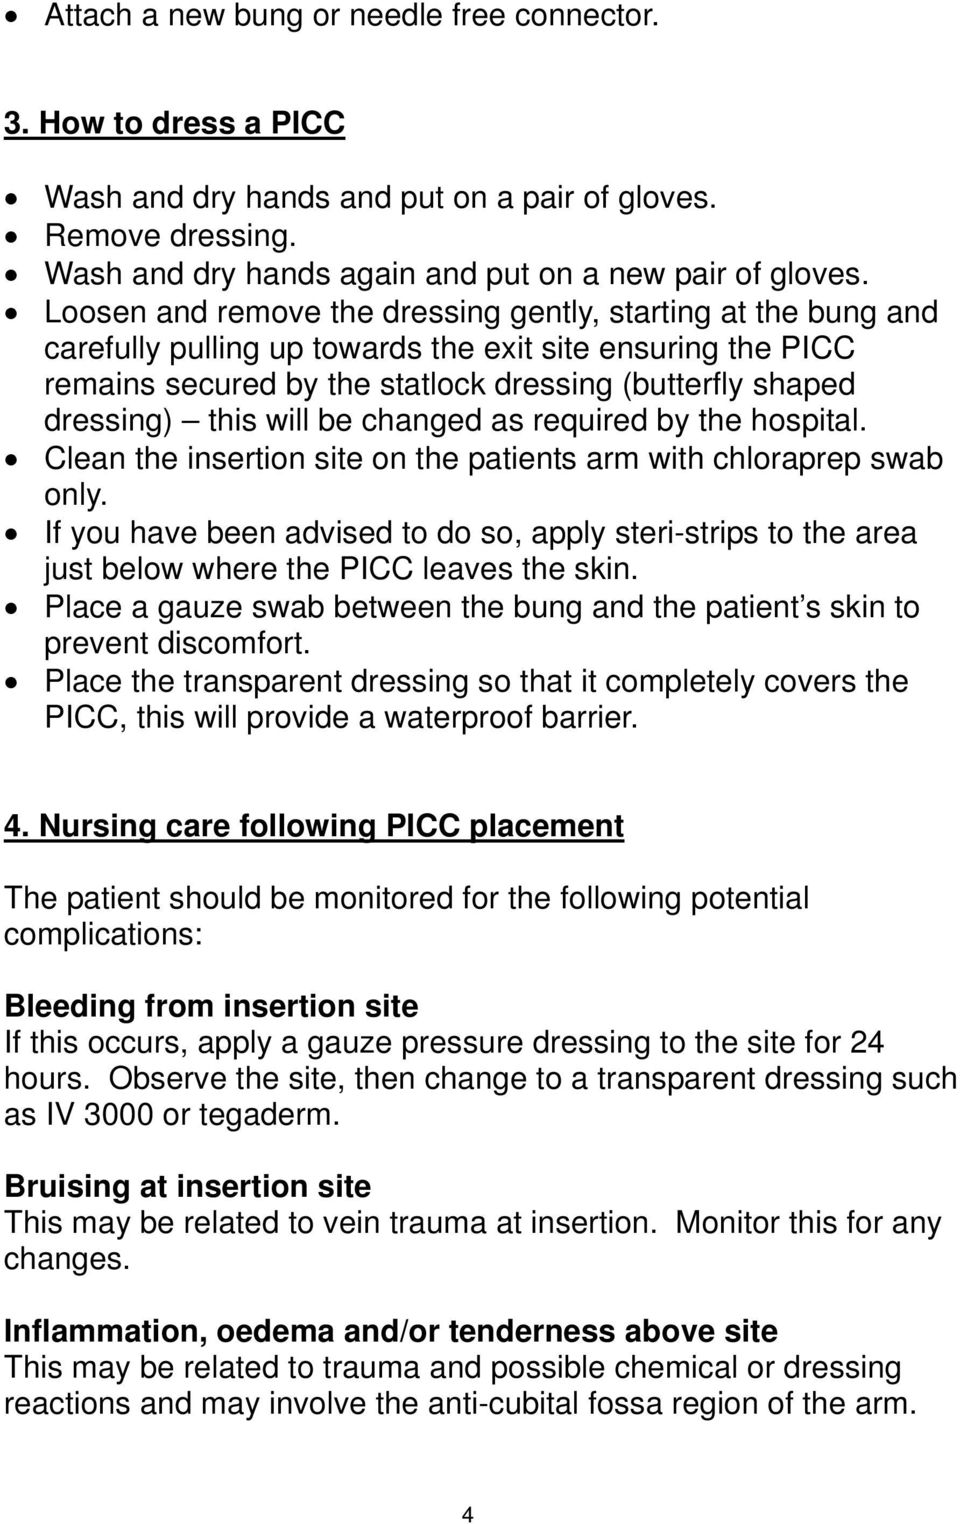 will be changed as required by the hospital. Clean the insertion site on the patients arm with chloraprep swab only.